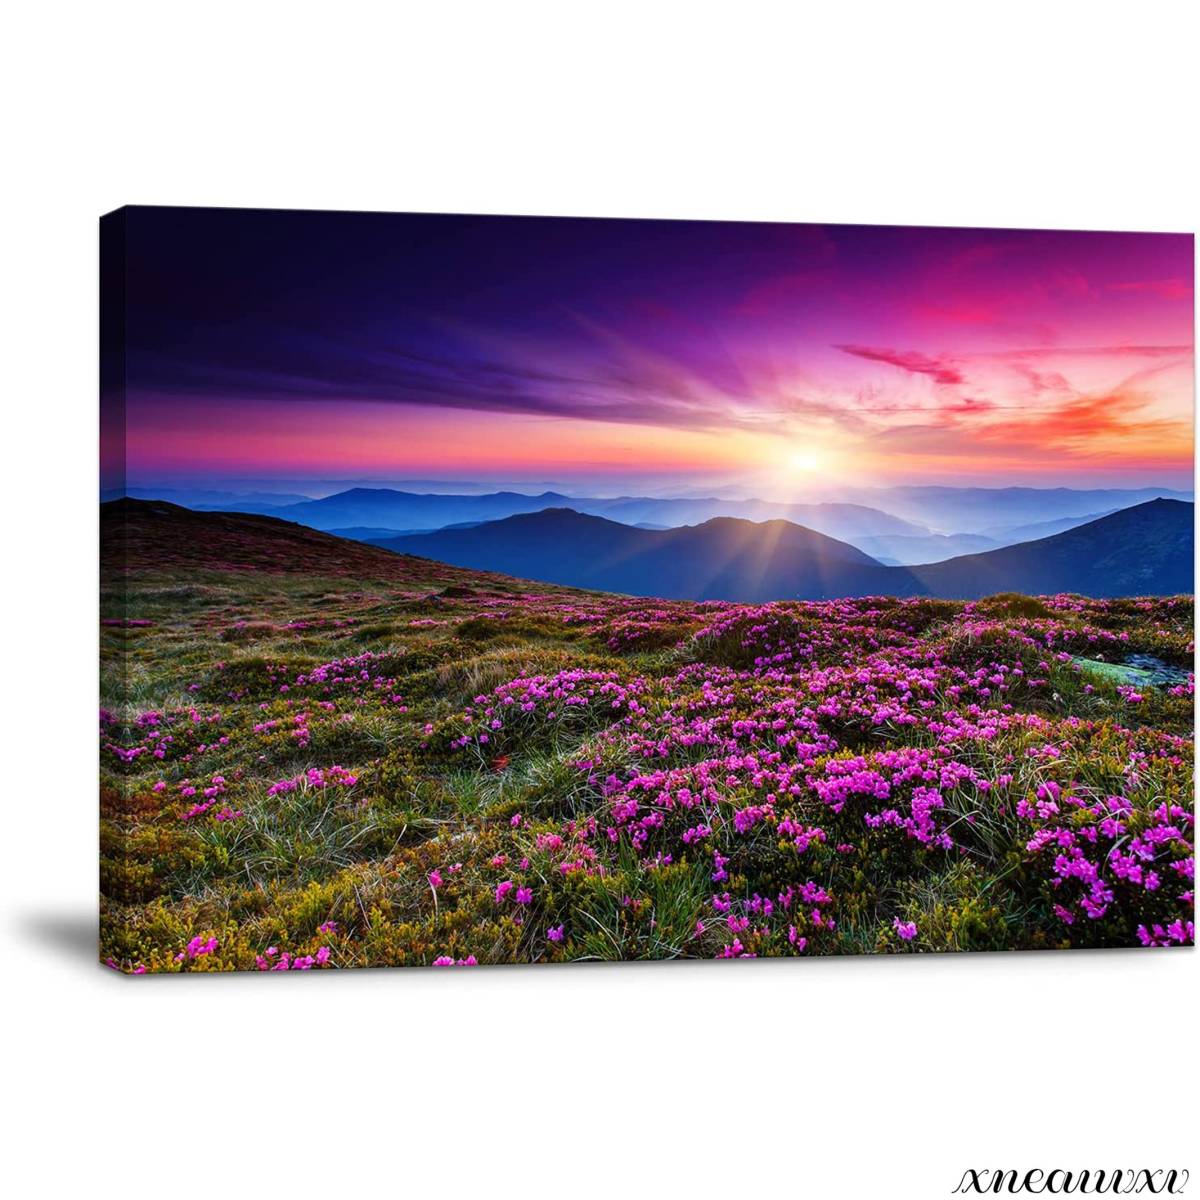 Large Size Spectacular Art Panel Natural Scenery Flower Sunrise Interior Wall Hanging Room Decor Decoration Canvas Painting Stylish Art Appreciation Living Room, artwork, painting, graphic